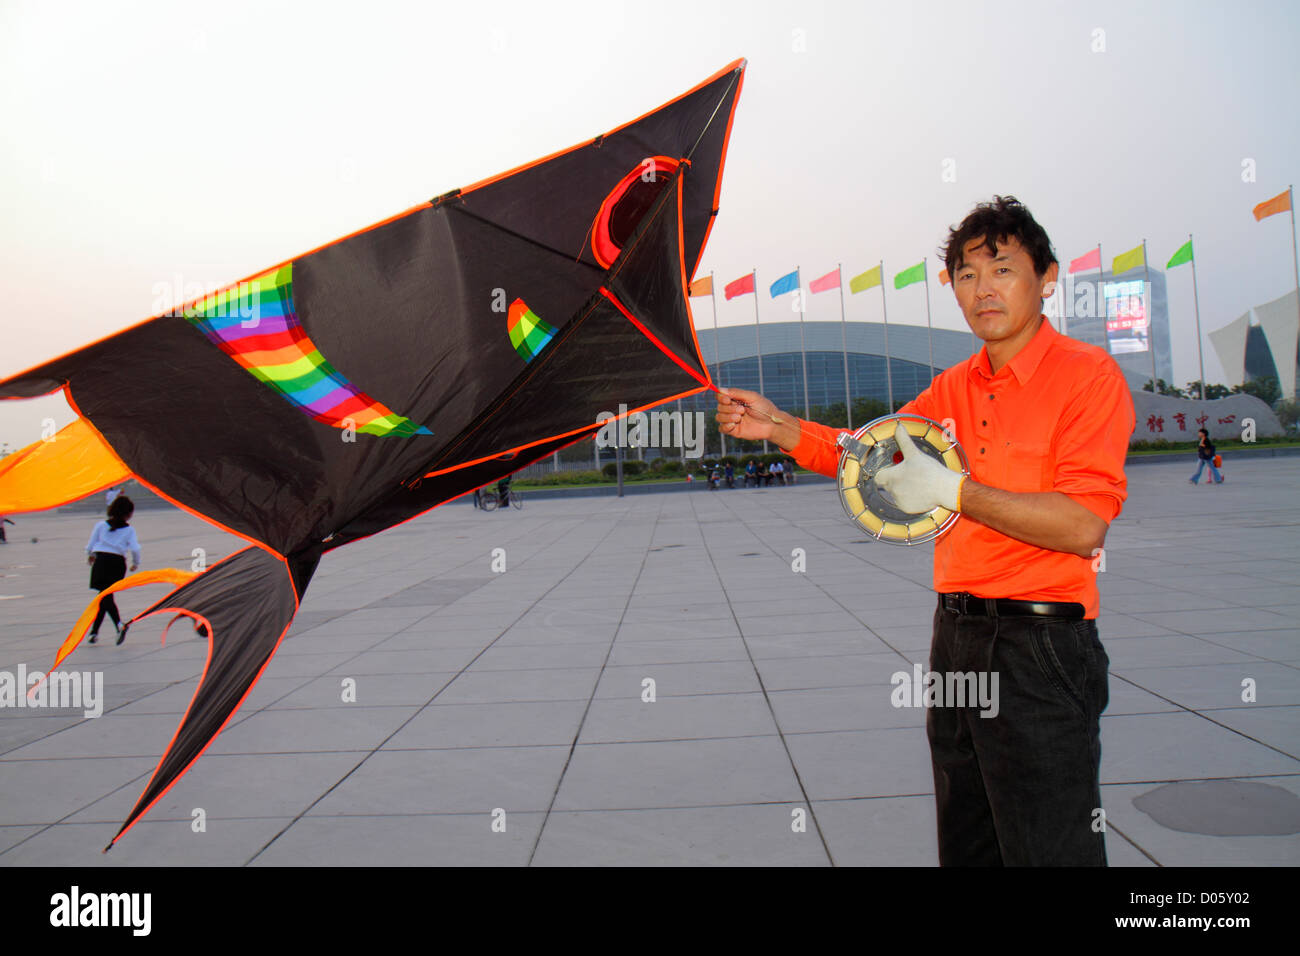 Shanghai China, Chinese Pudong Xin District, Oriental Sports Center, Asian man men Male adult adult, Delta-Drachen-Flyer, fliegen, Rolle, Linie, Handrad, Hobby, C Stockfoto